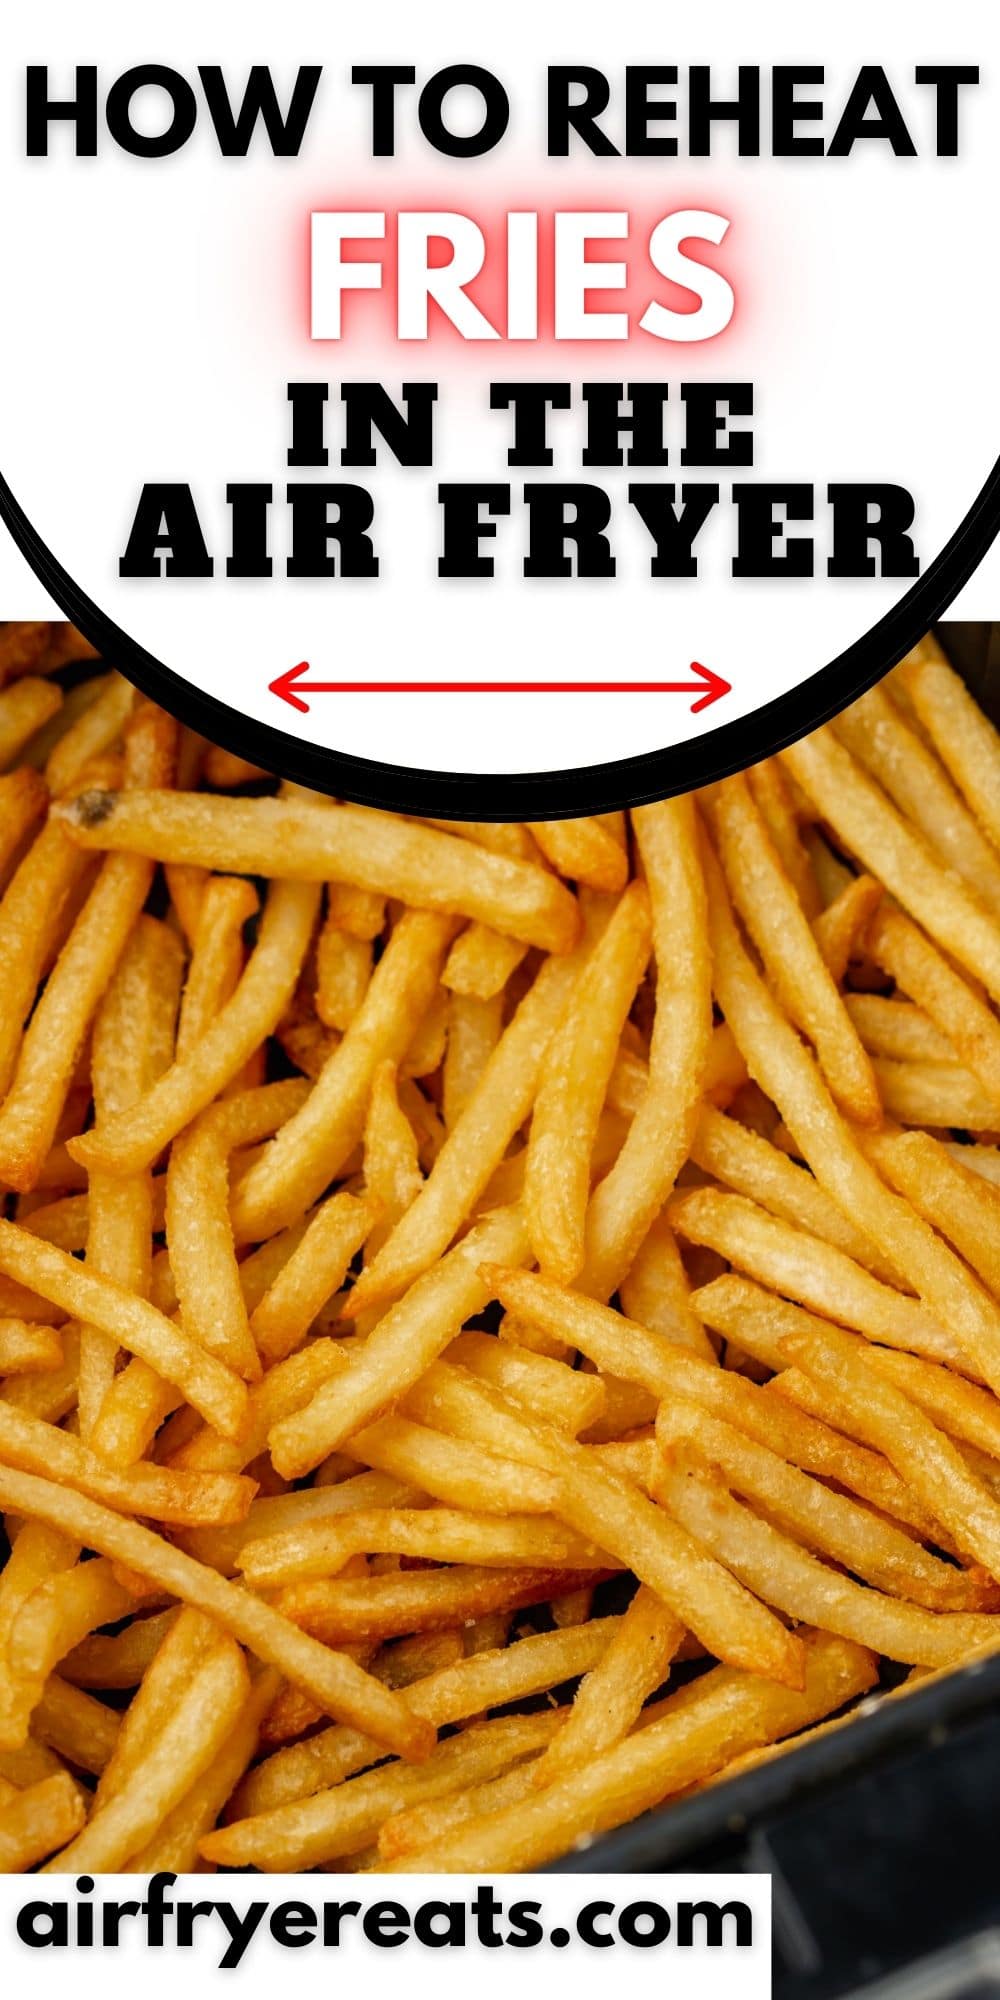 Get all of our best tips and tricks for reheating fries in the air fryer. Learn how to reheat fries in the air fryer, and you'll never have to suffer through cold or microwaved french fries again! via @vegetarianmamma